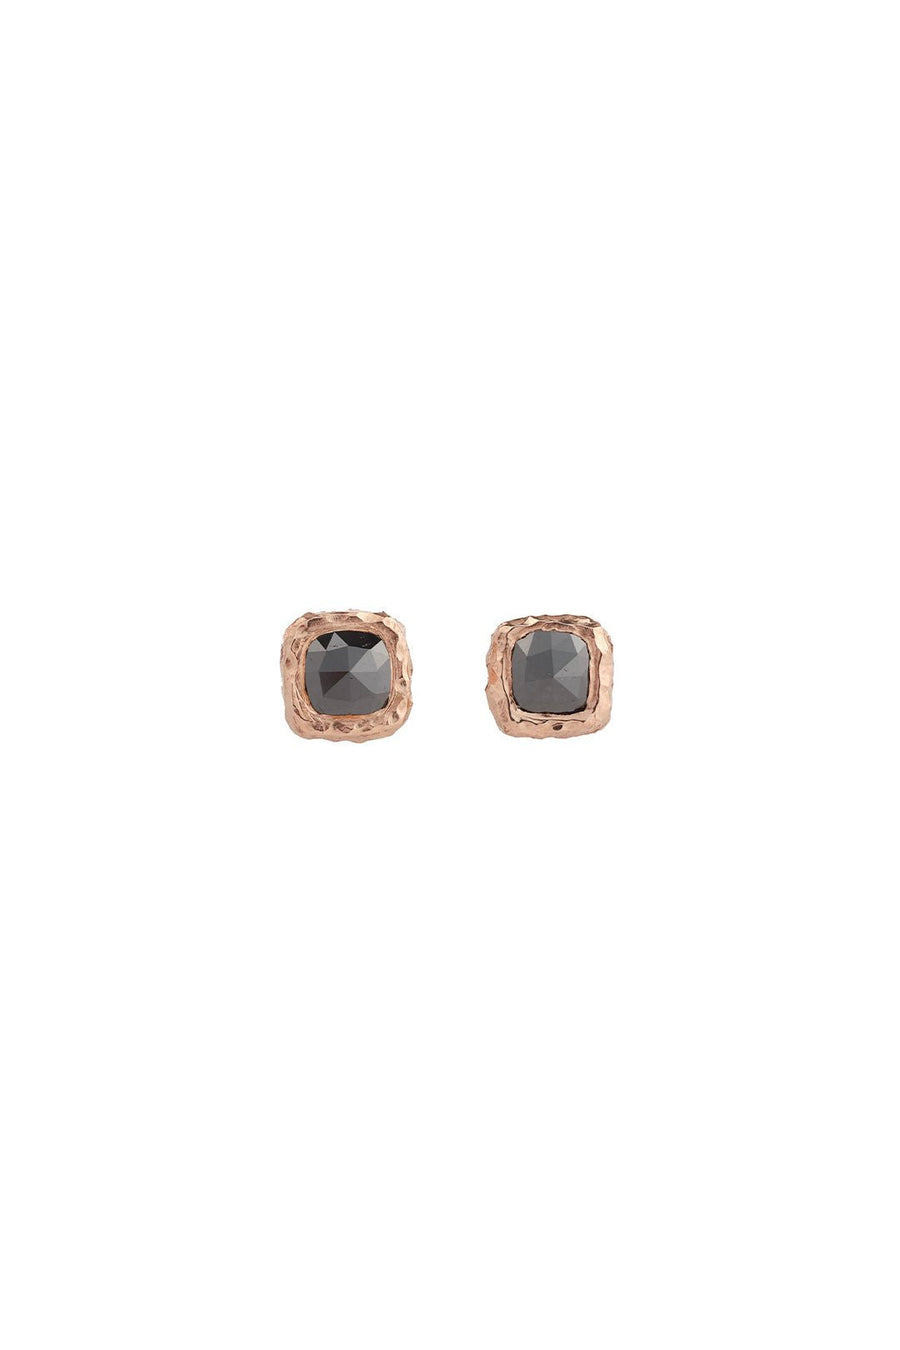 SIA EARRINGS, ROSE GOLD - Burning Torch Online Boutique